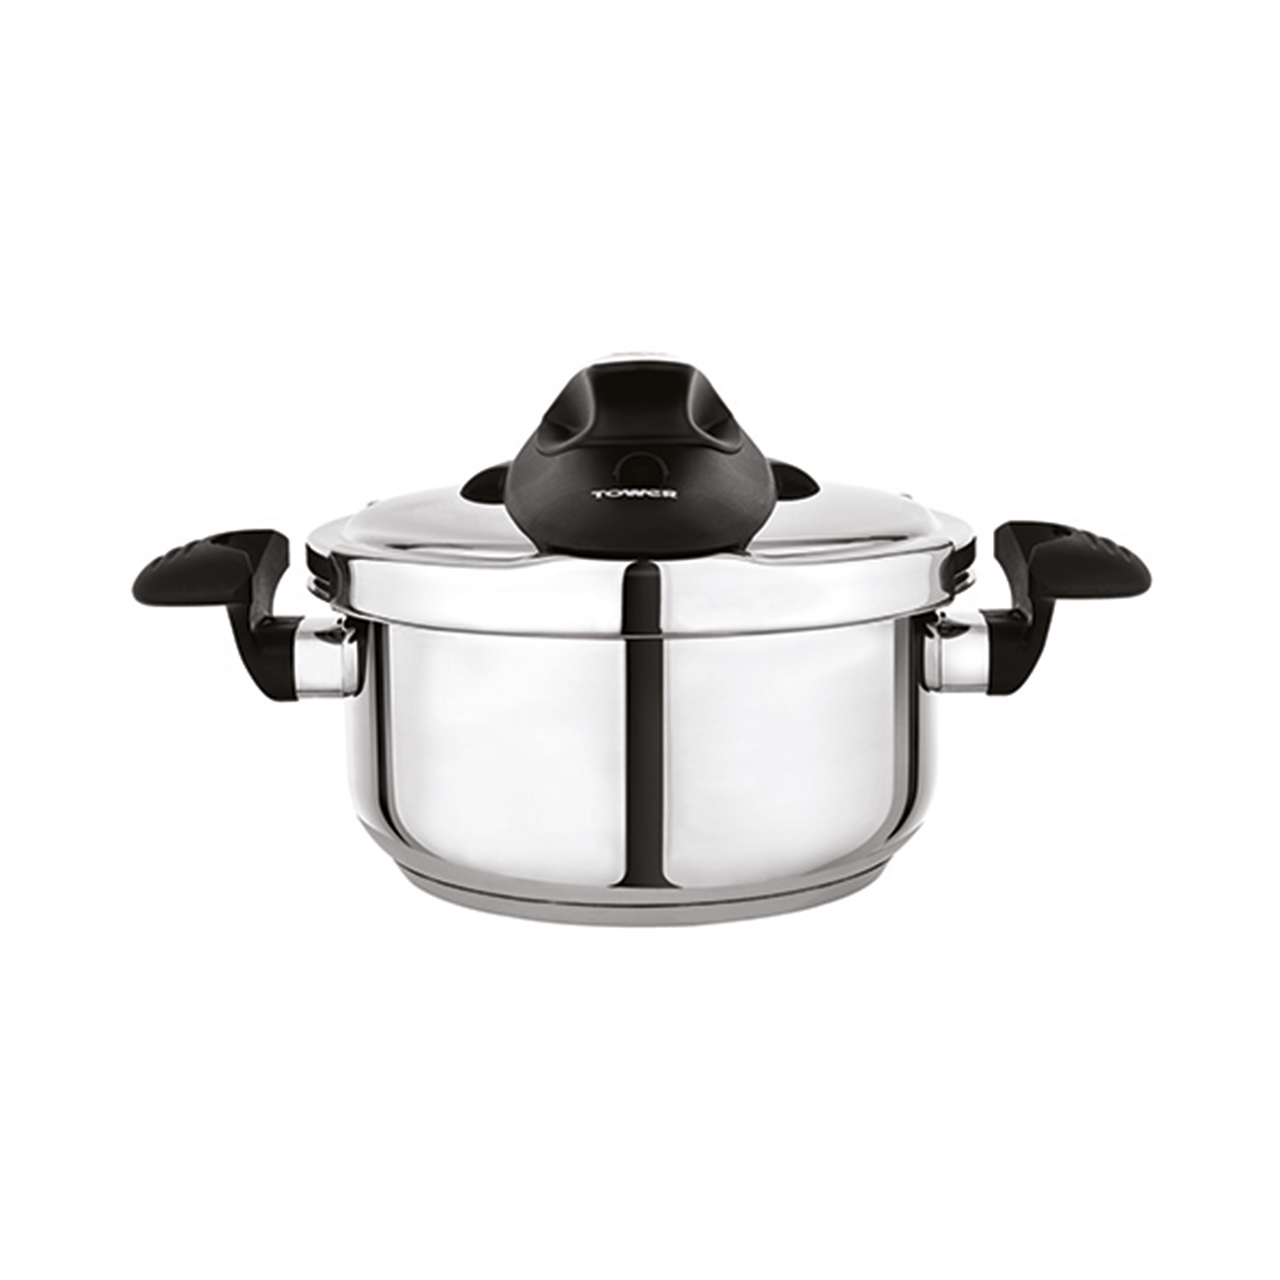 One-Touch 4 Litre Pressure Cooker